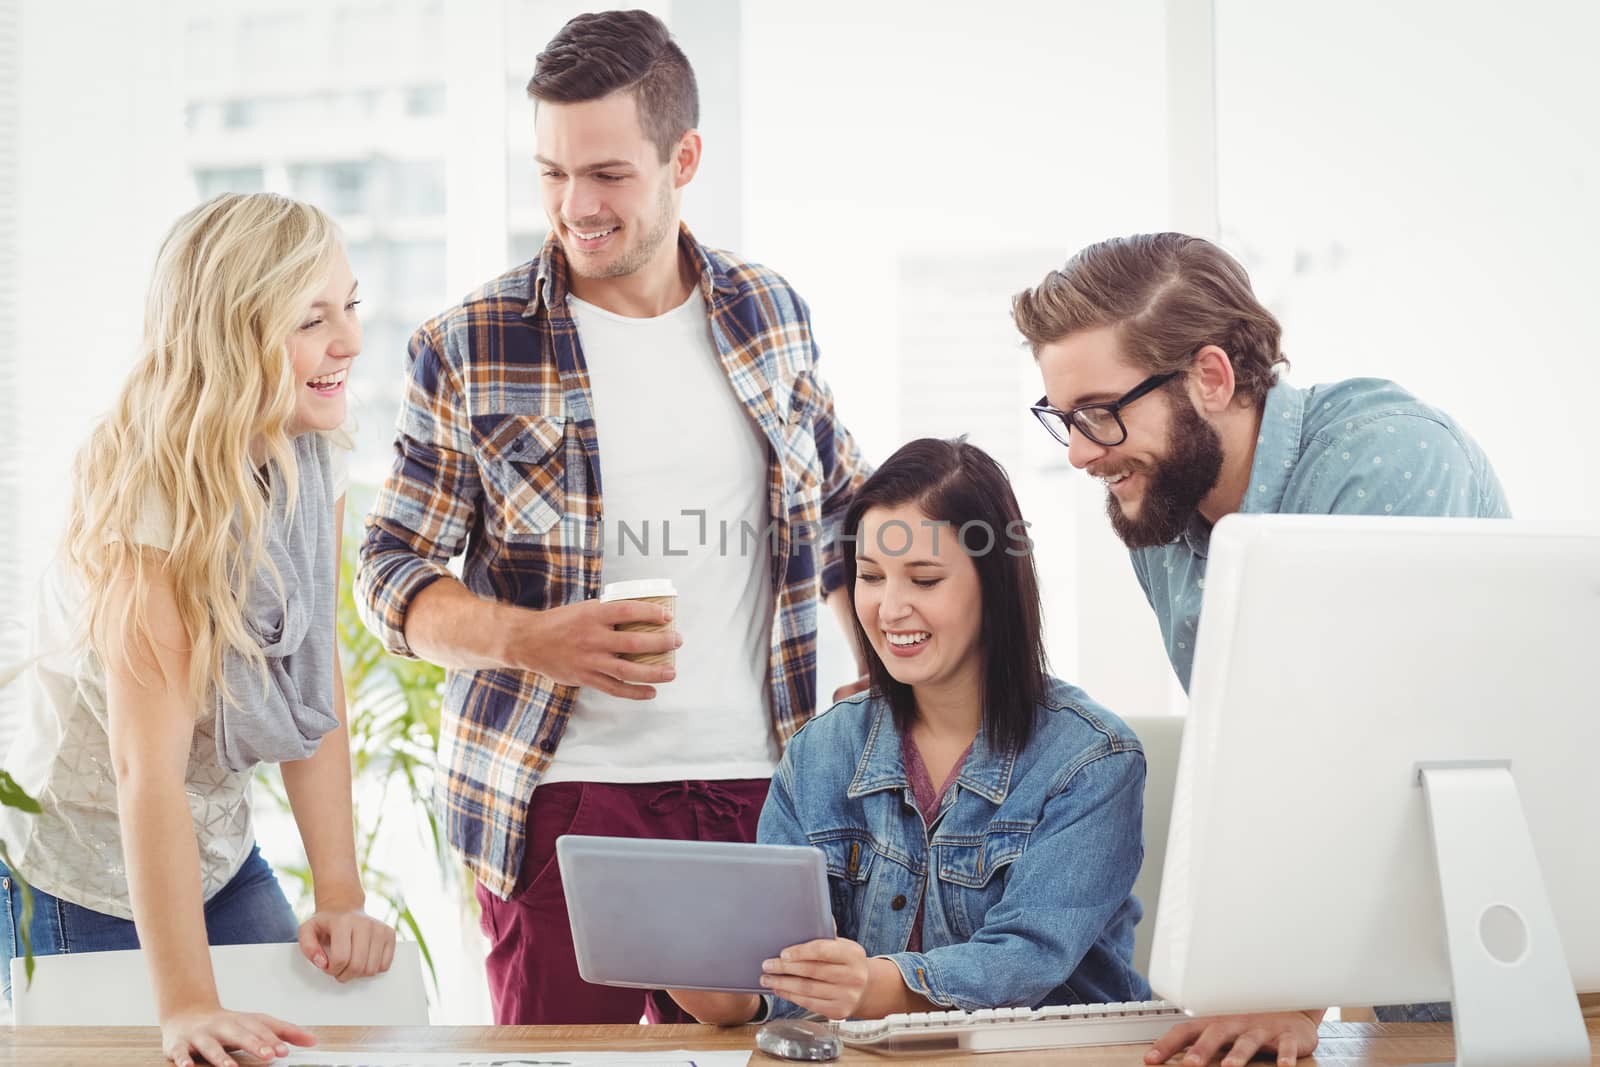 Smiling Business professionals using digital tablet while sitting at desk in office